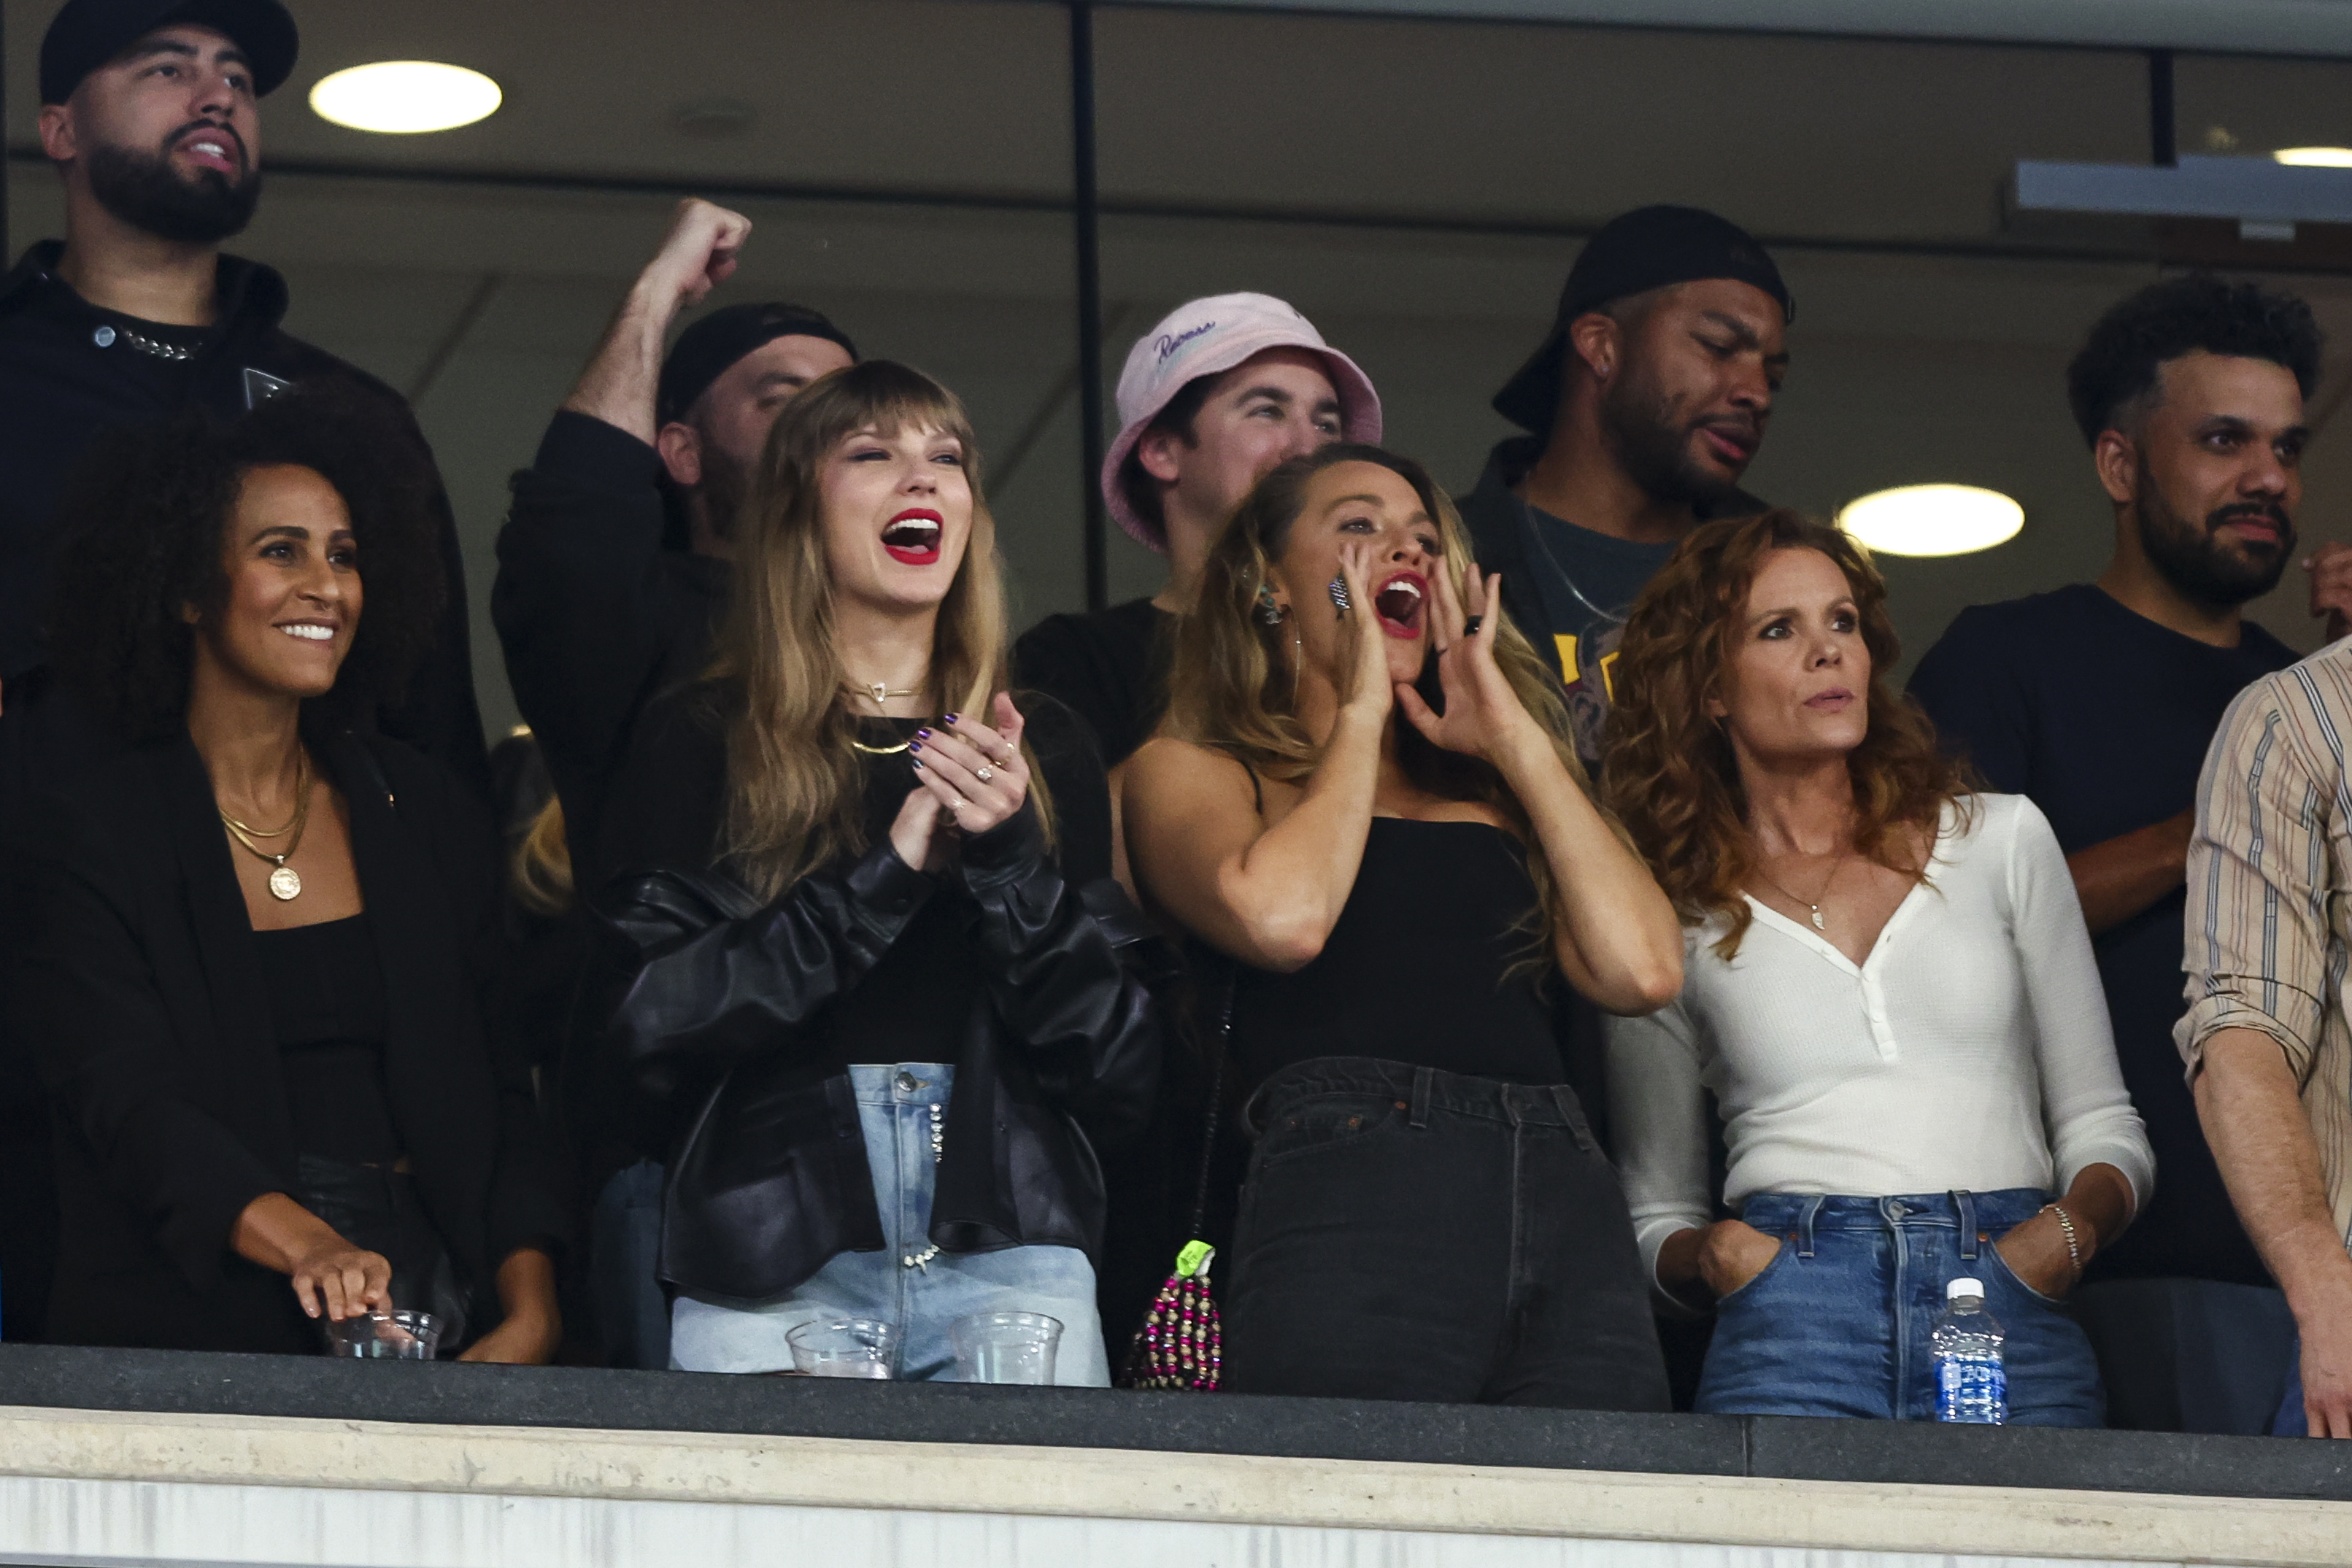 taylor and friends cheering at the game